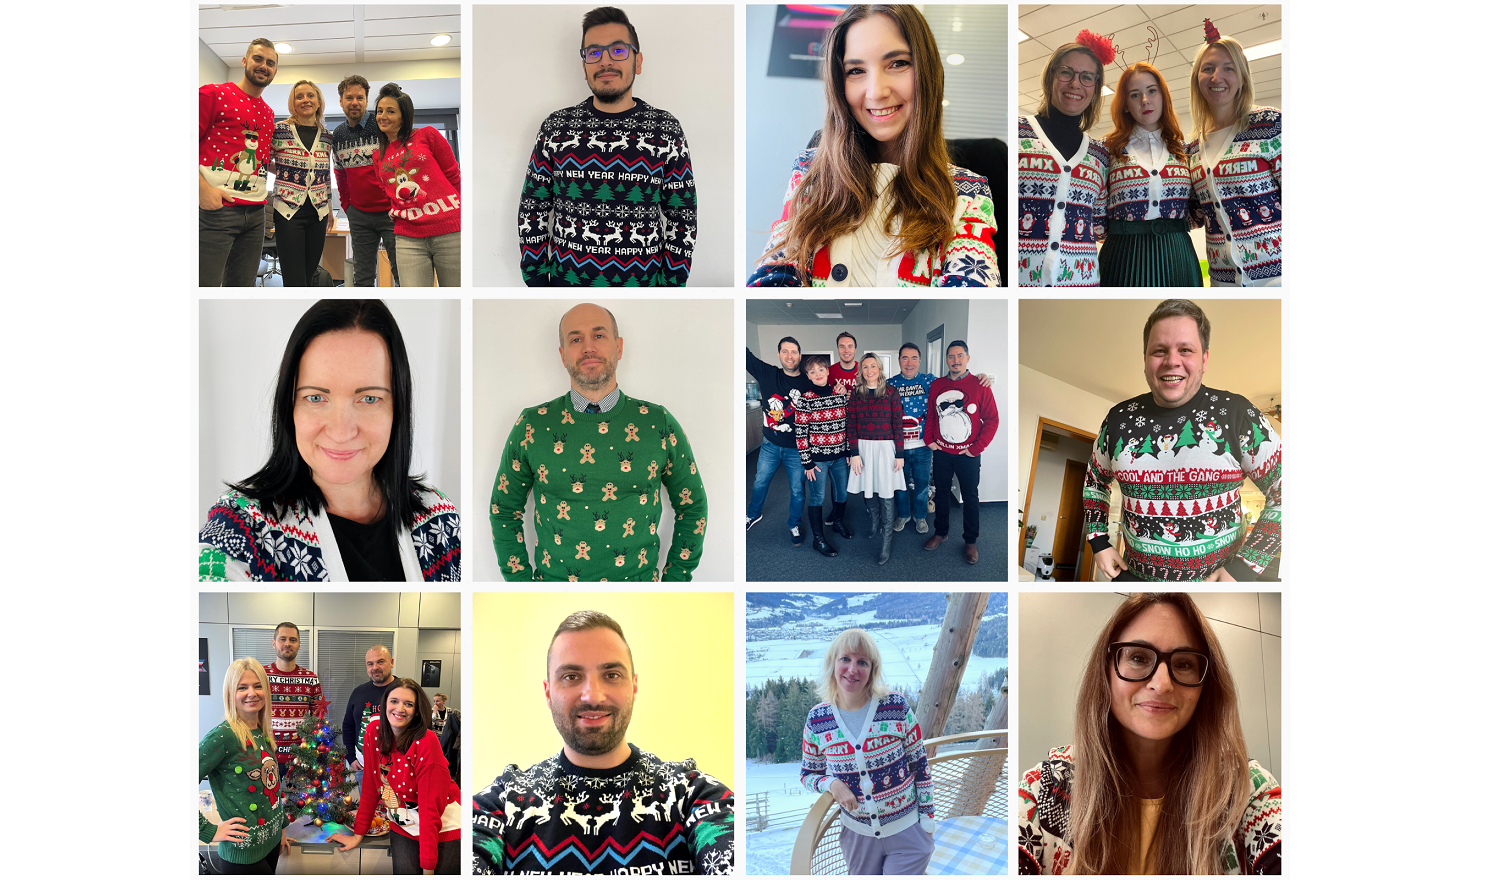 Great photos from four great teams wearing ugly sweaters! Photo credit: Apcom